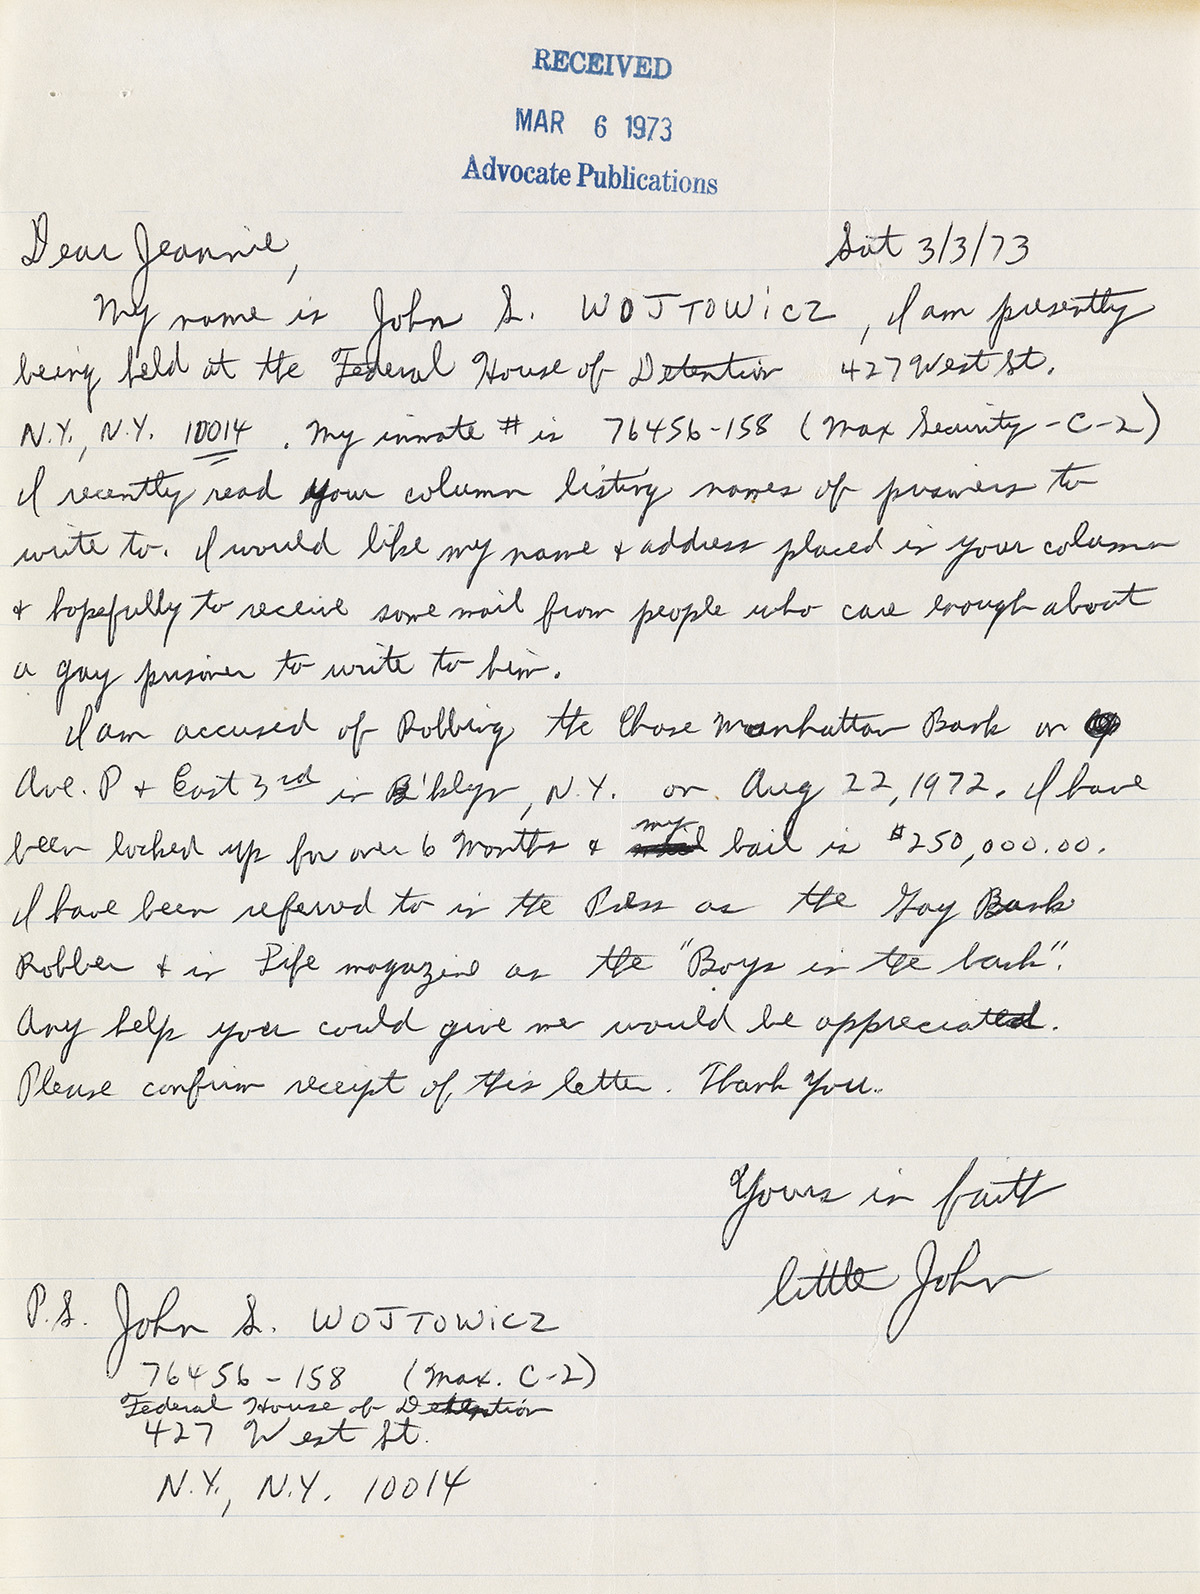 JOHN WOJTOWICZ (1945-2006)  File of correspondence by the Gay Bank Robber of Dog Day Afternoon fame.